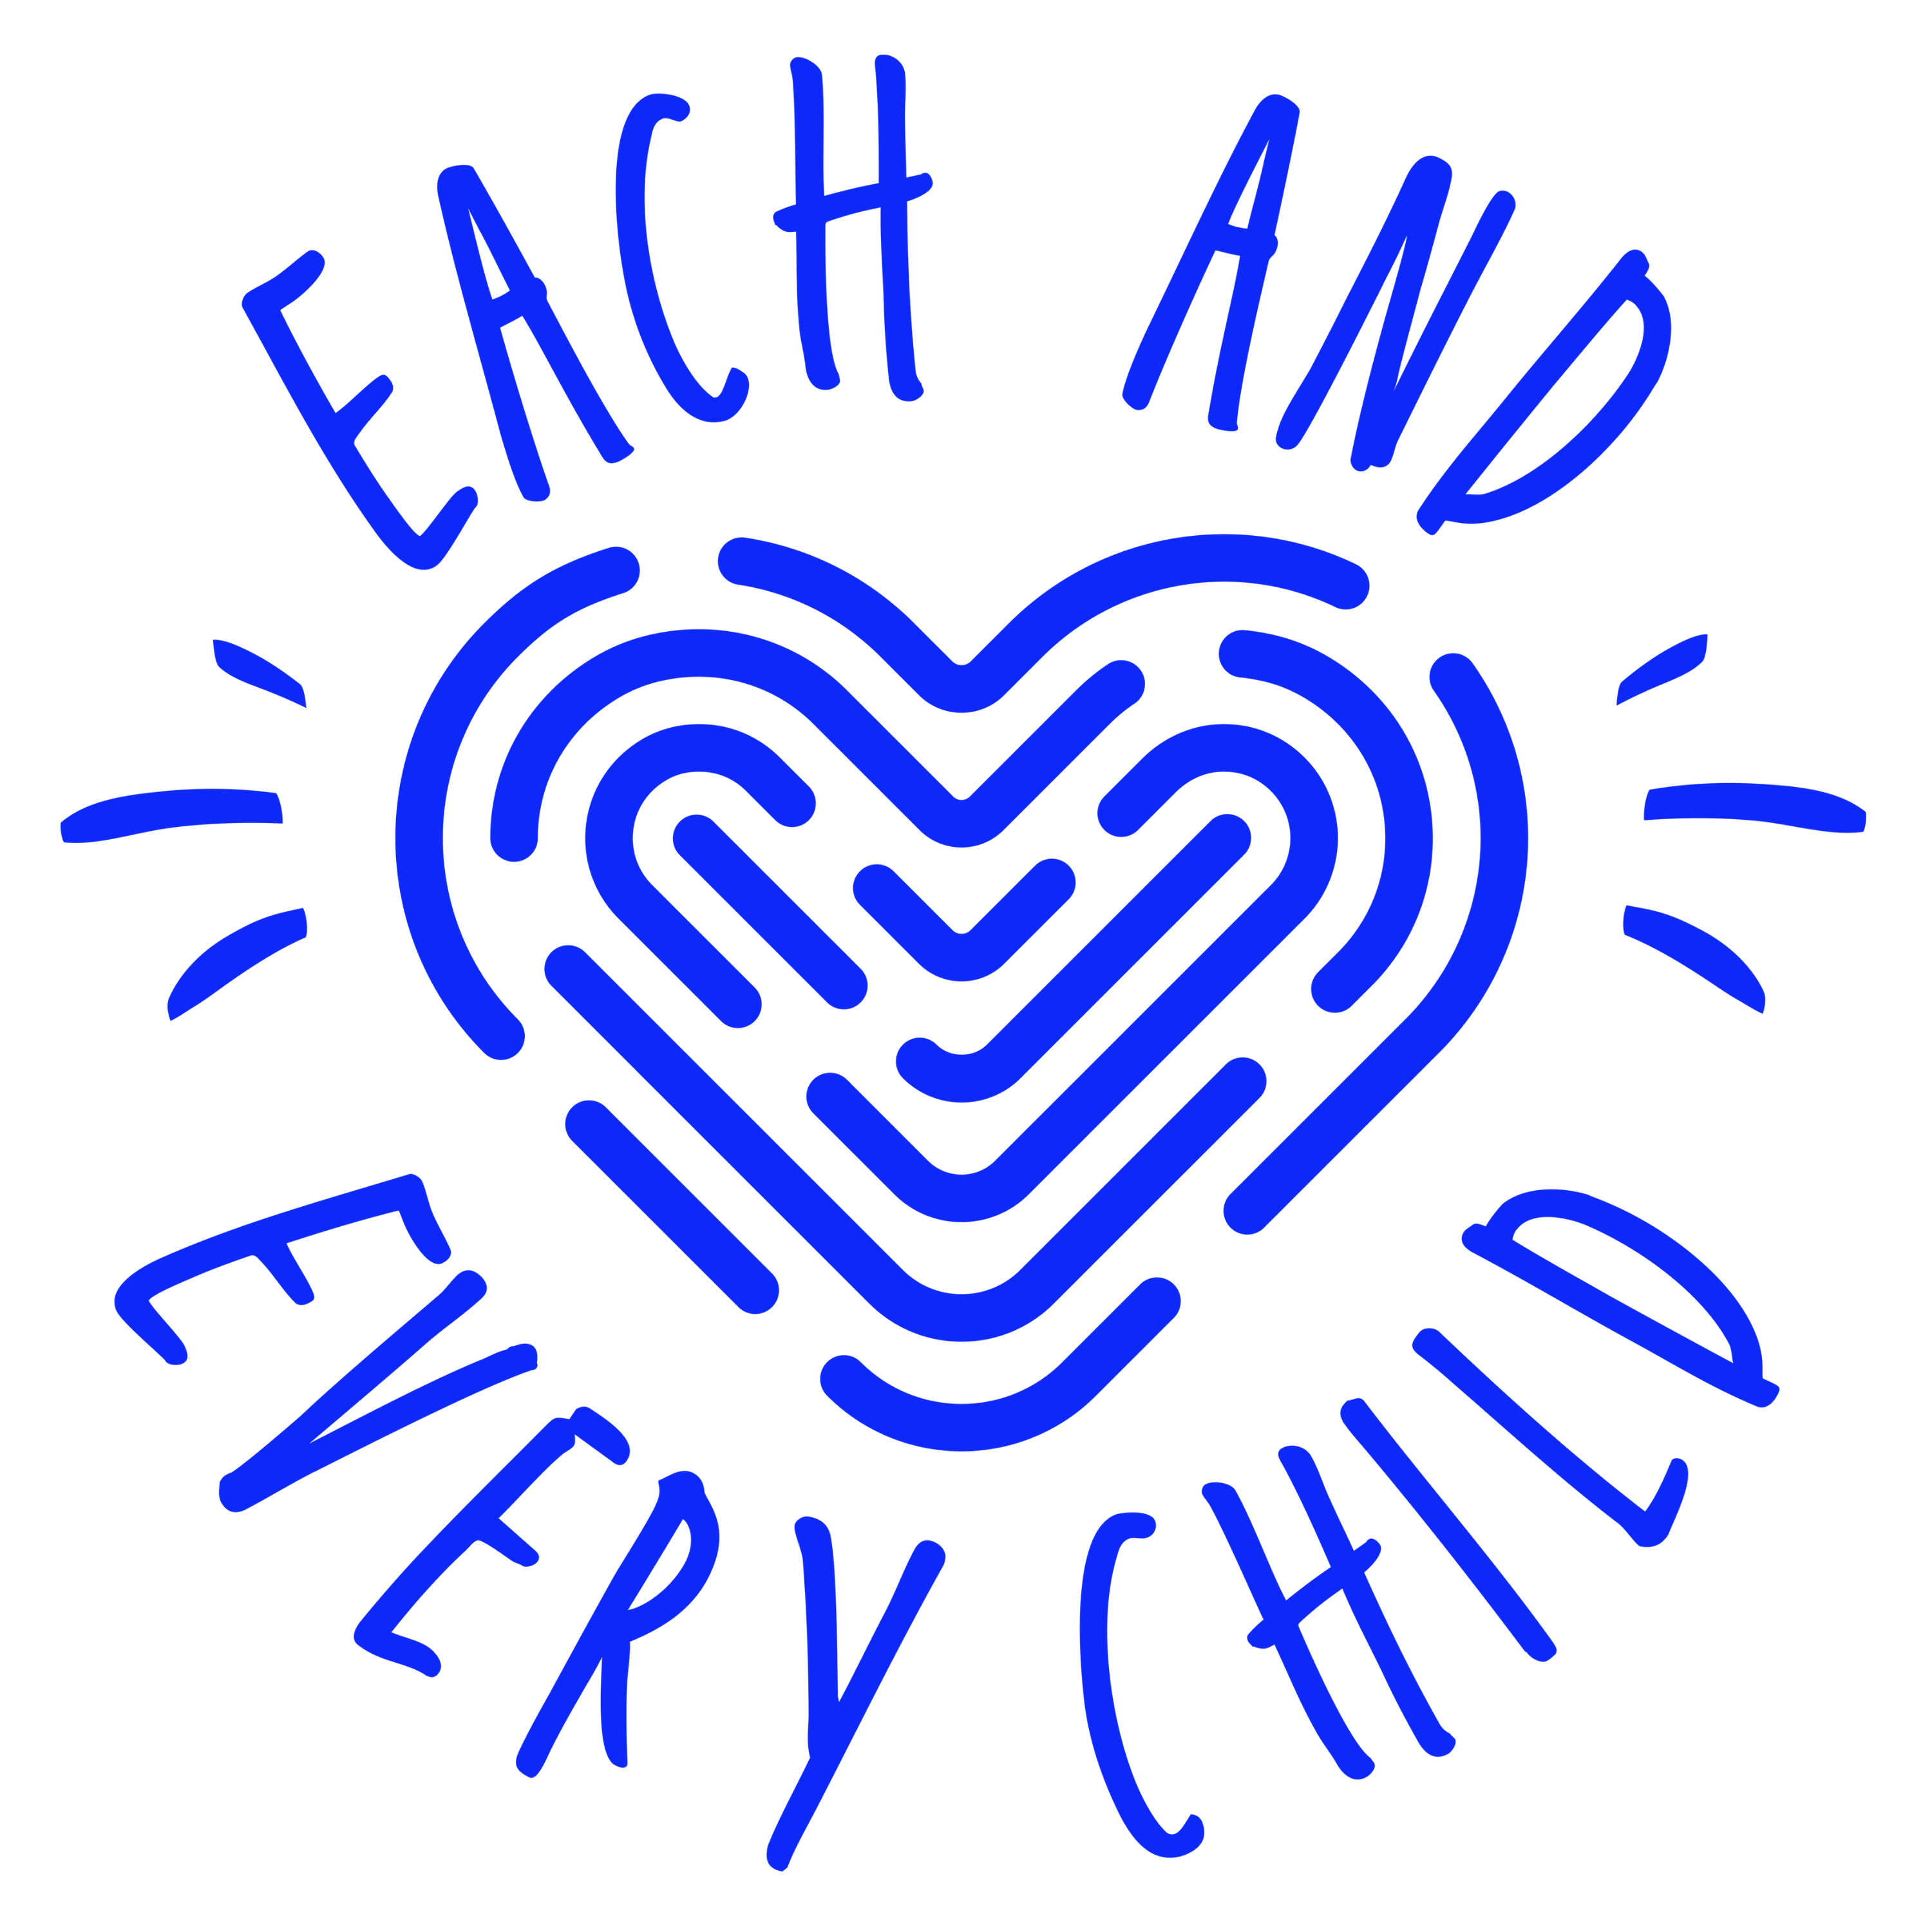 Each & Every Child